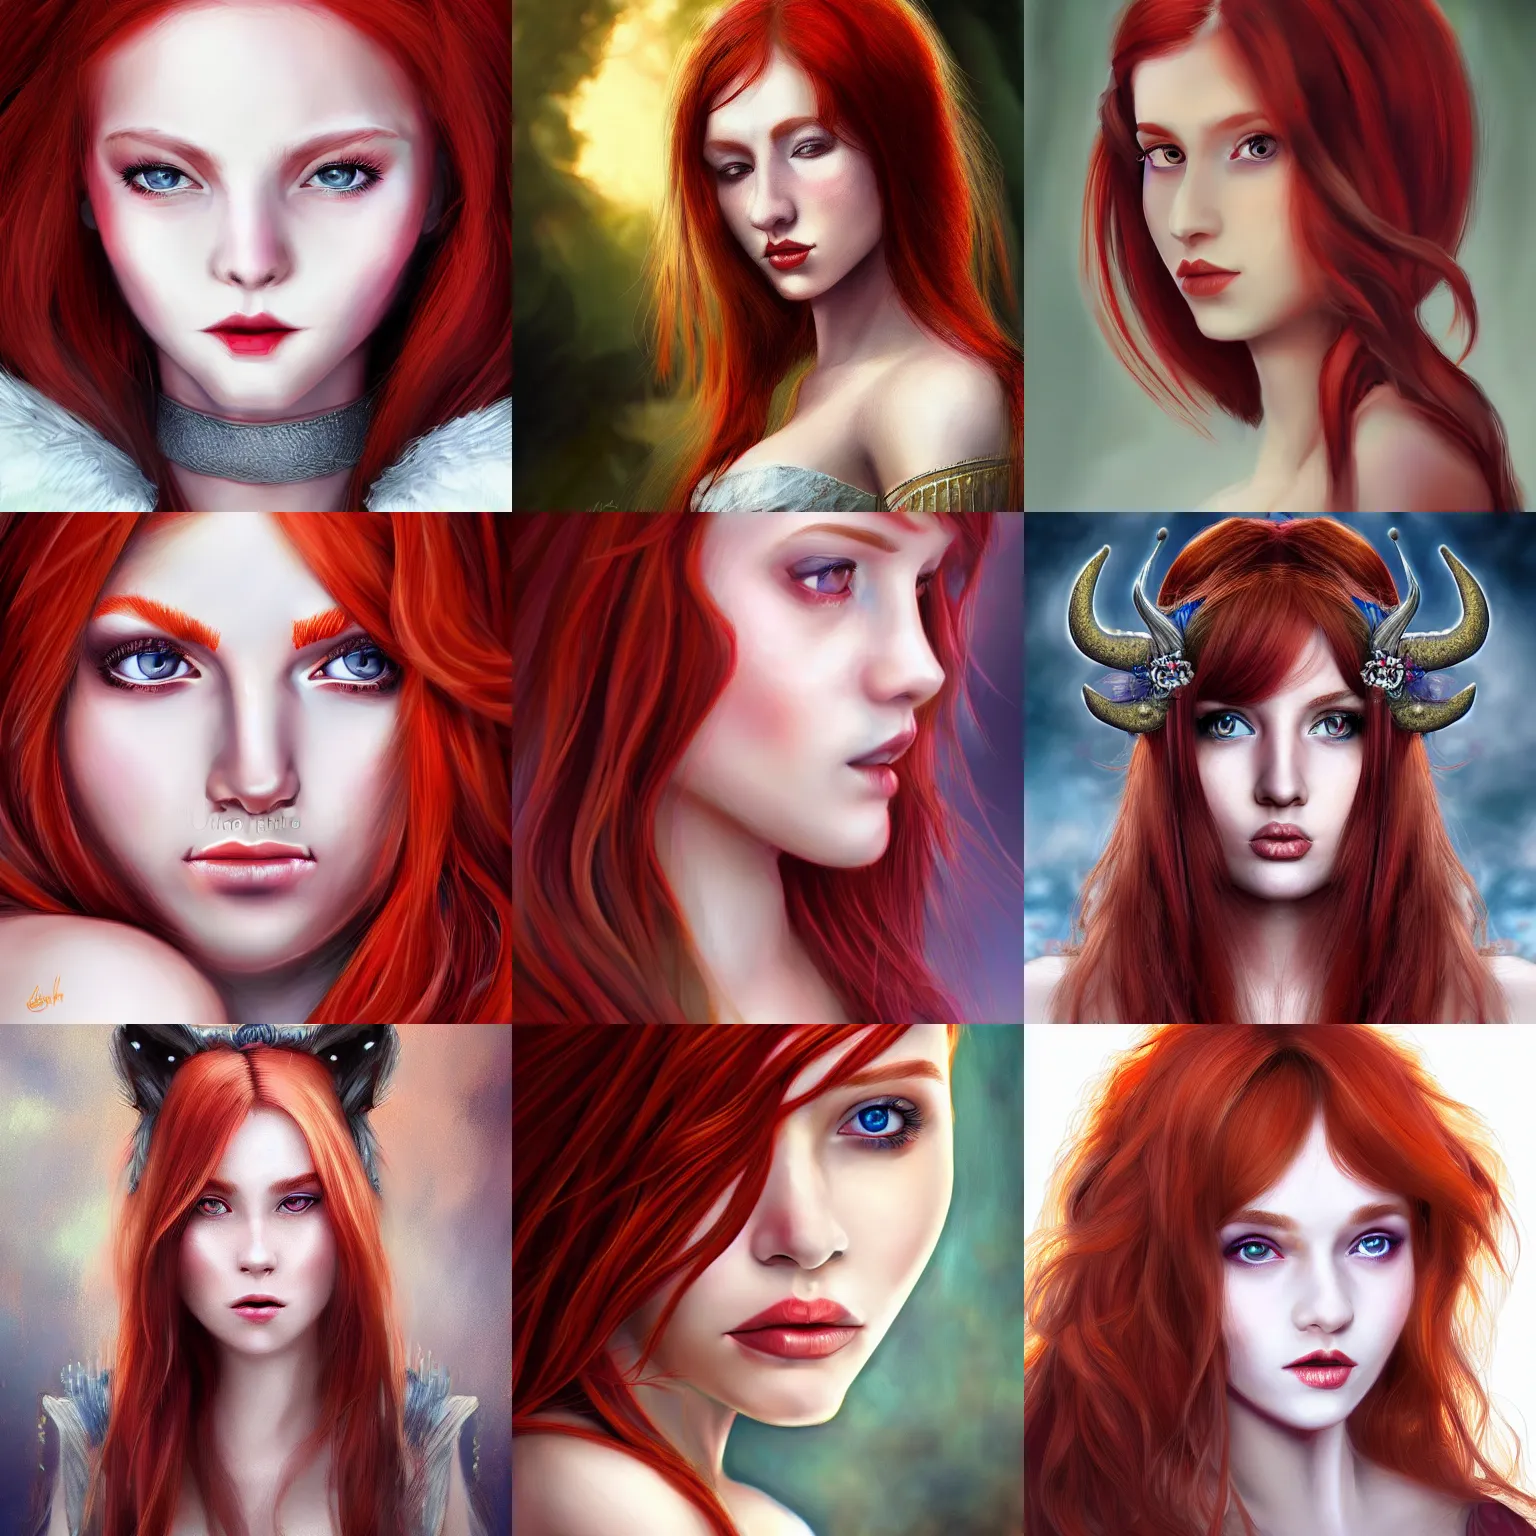 Prompt: close up portrait of a beautiful young red haired female with small white horns, digital fantasy art